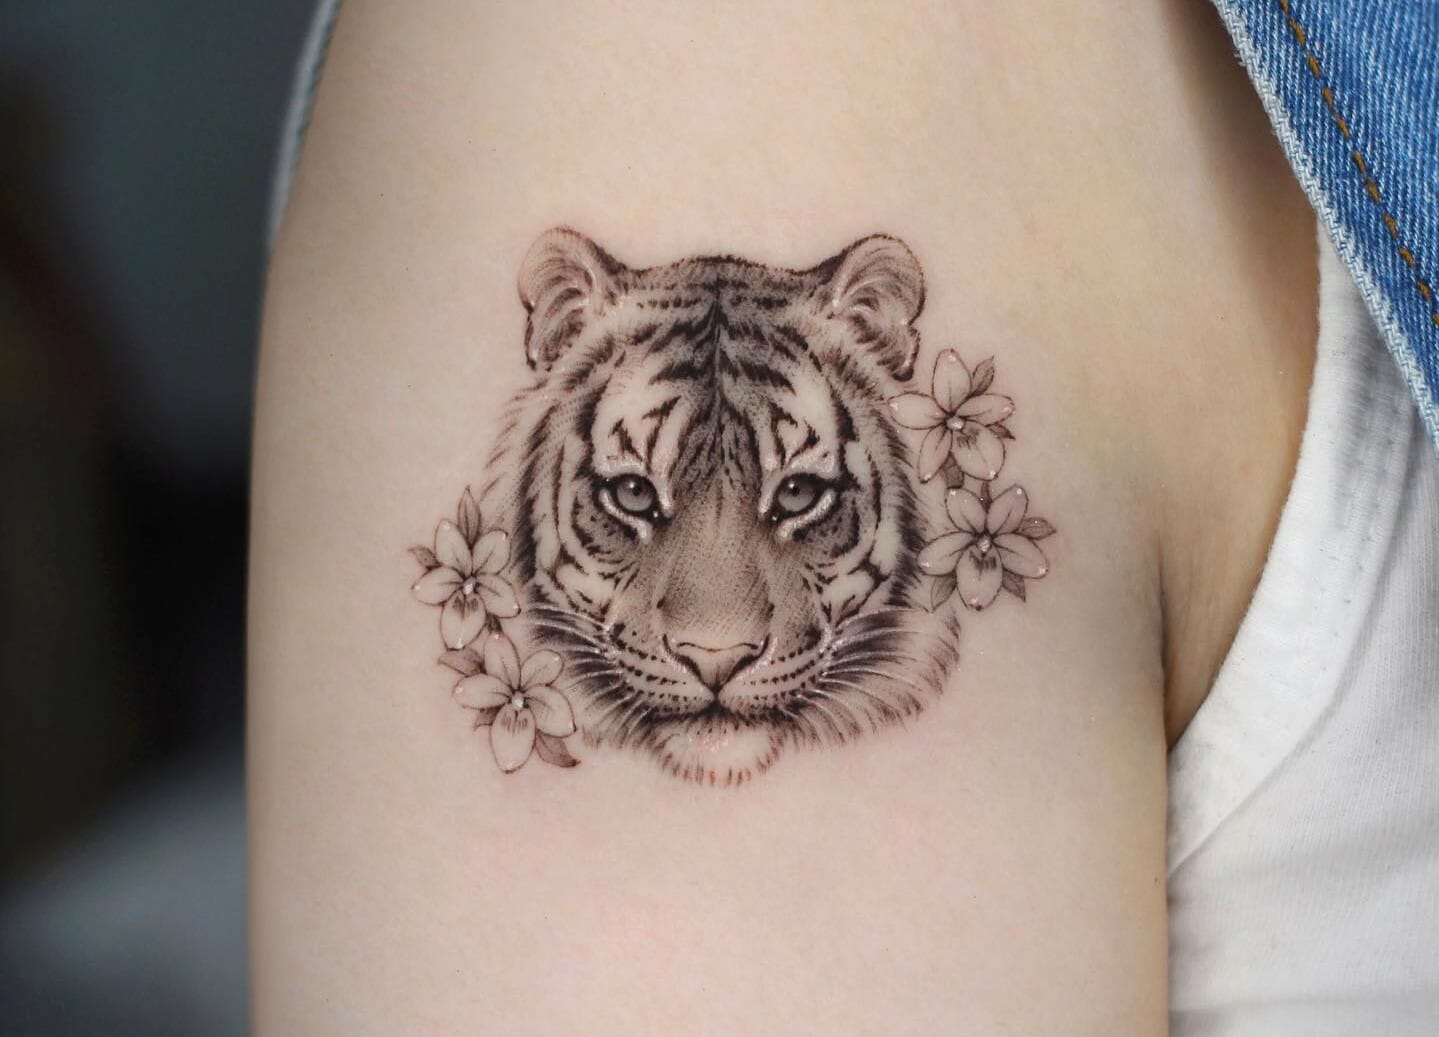 10+ Simple Tiger Tattoo Ideas That Will Blow Your Mind! - alexie